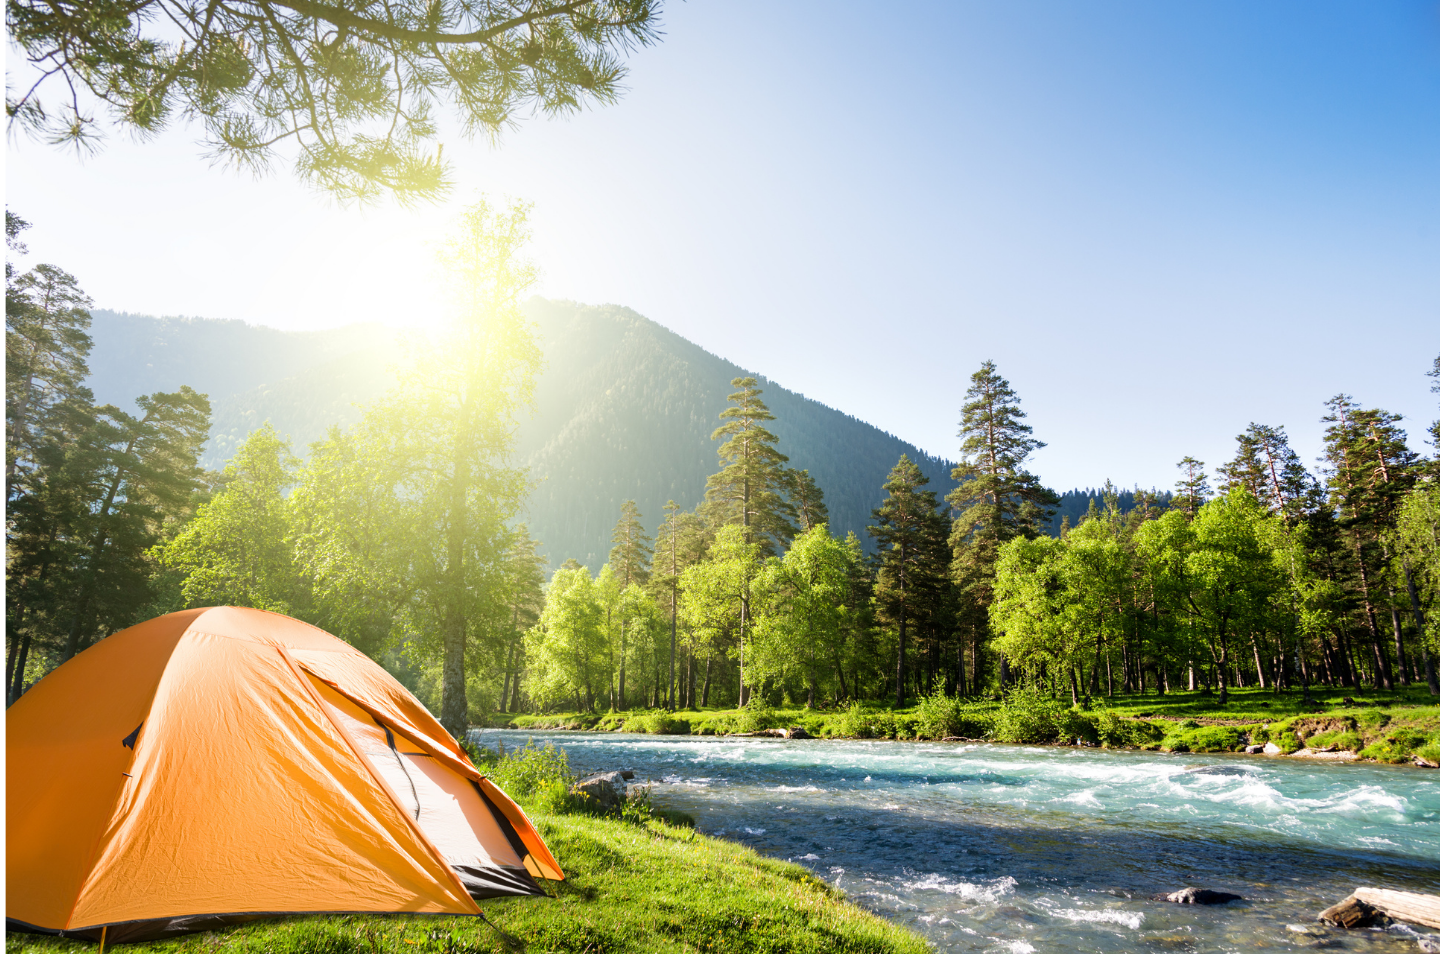 The Best Camping Gear to Really Enjoy the Outdoors